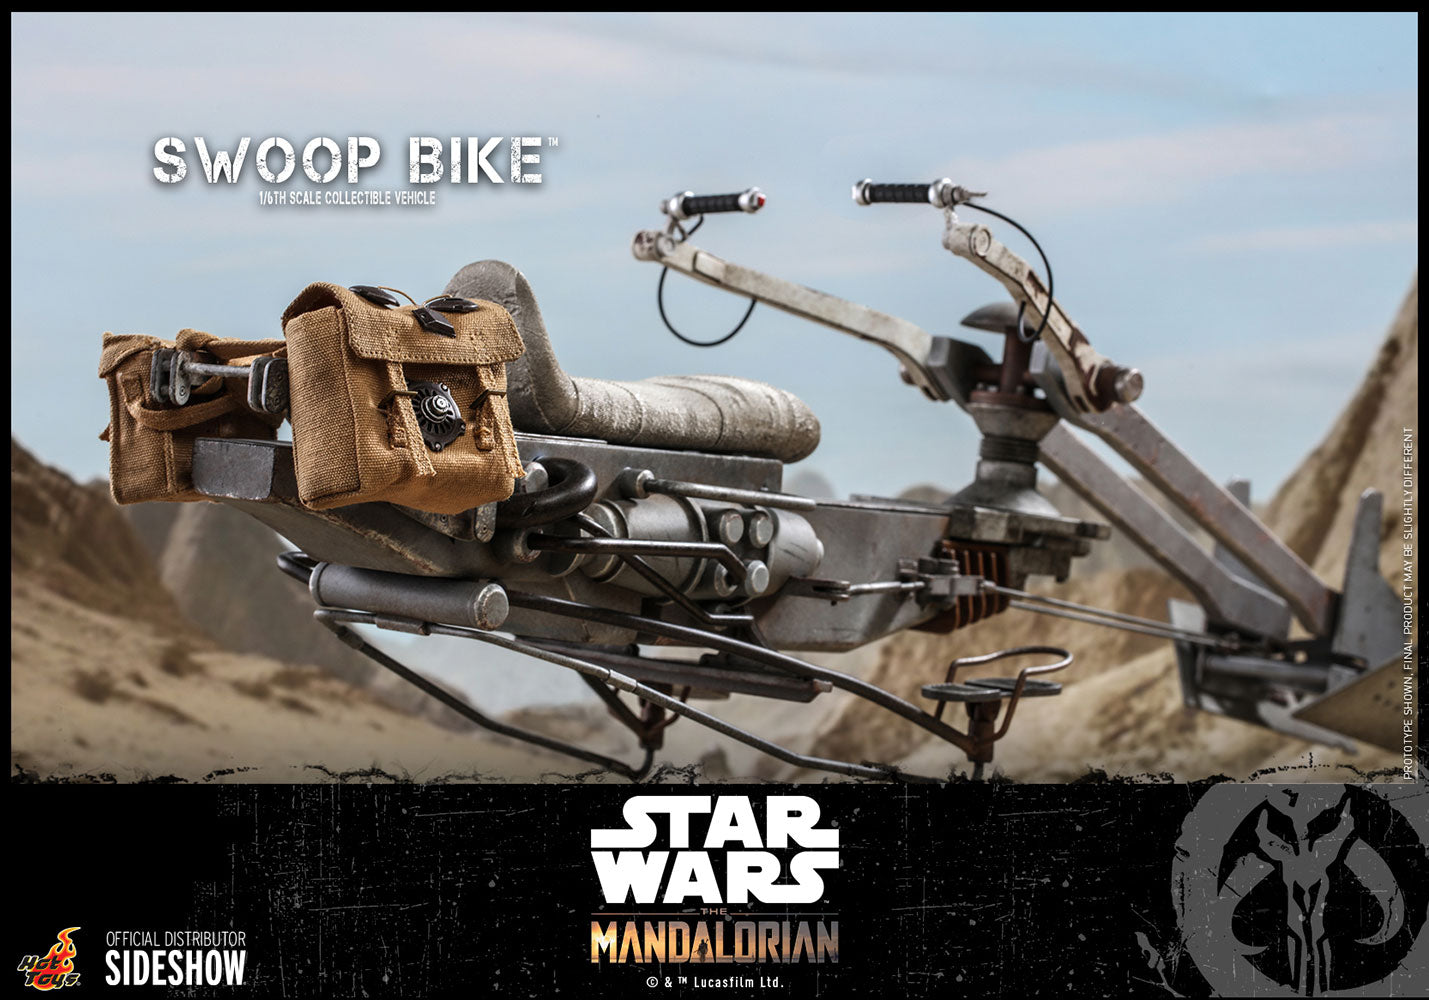 Swoop Bike (Star Wars) Sixth Scale Figure Vehicle by Hot Toys